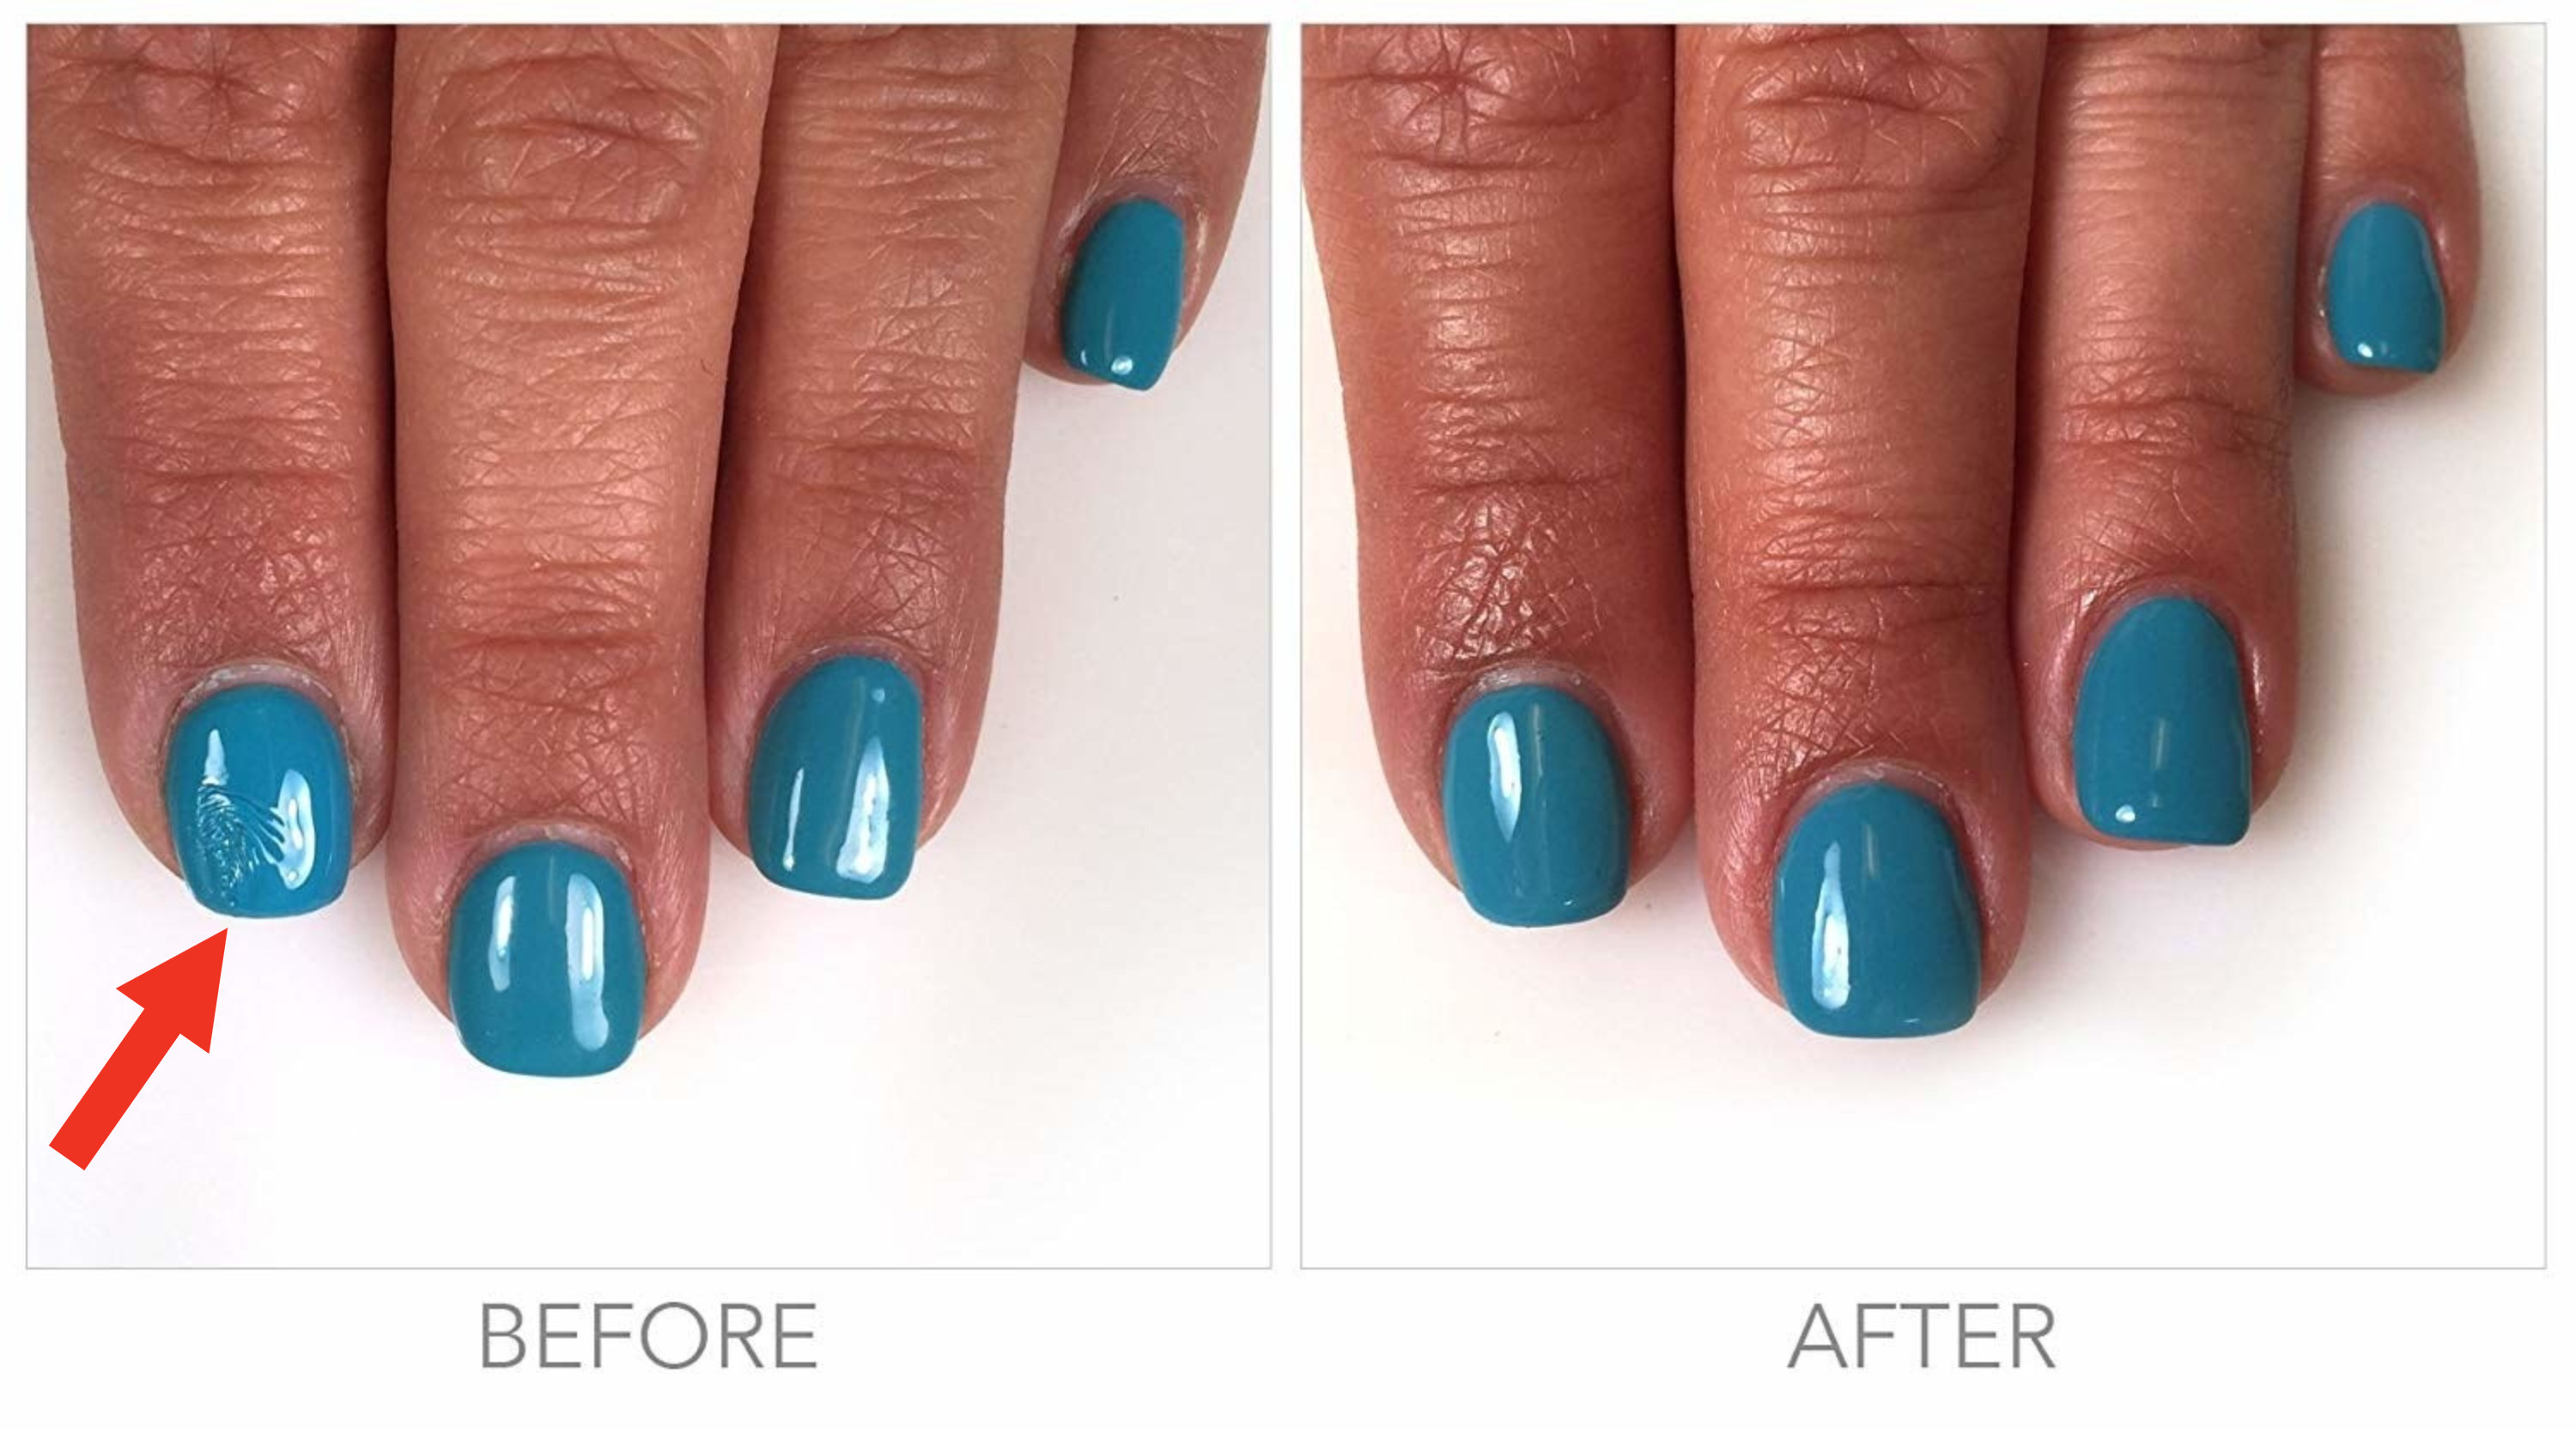 Before image of a smudged blue fingernail and after image of it un-smudged 